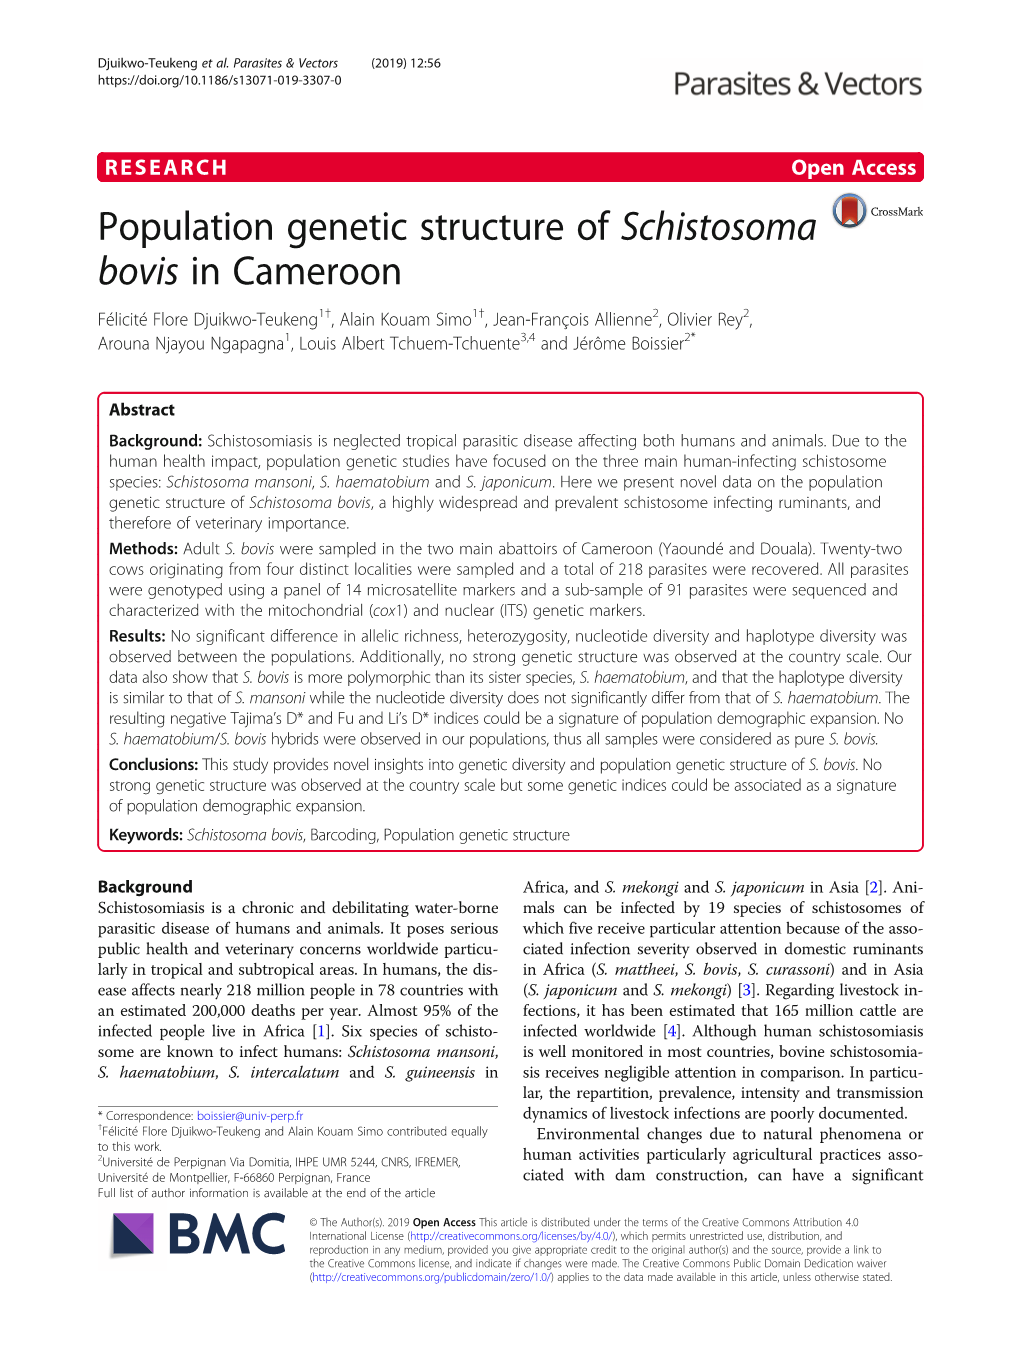 Population Genetic Structure of Schistosoma Bovis in Cameroon